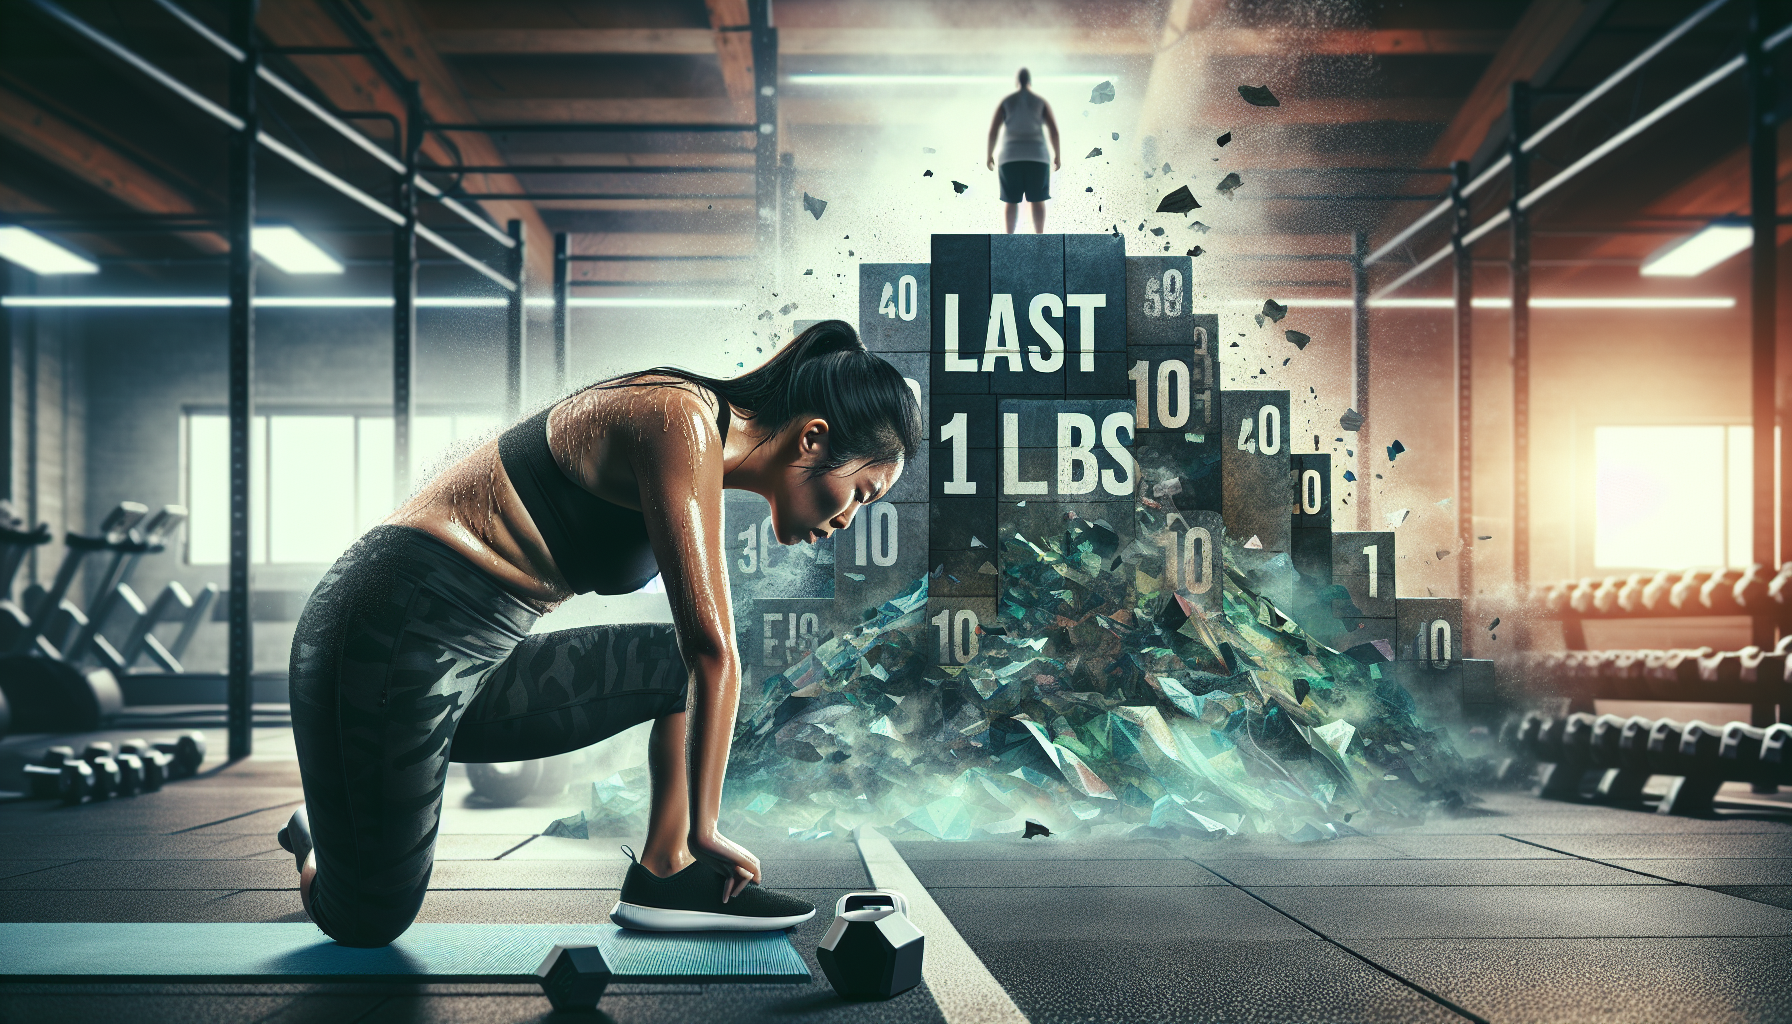 Why Are The Last 10 Lbs The Hardest To Lose?